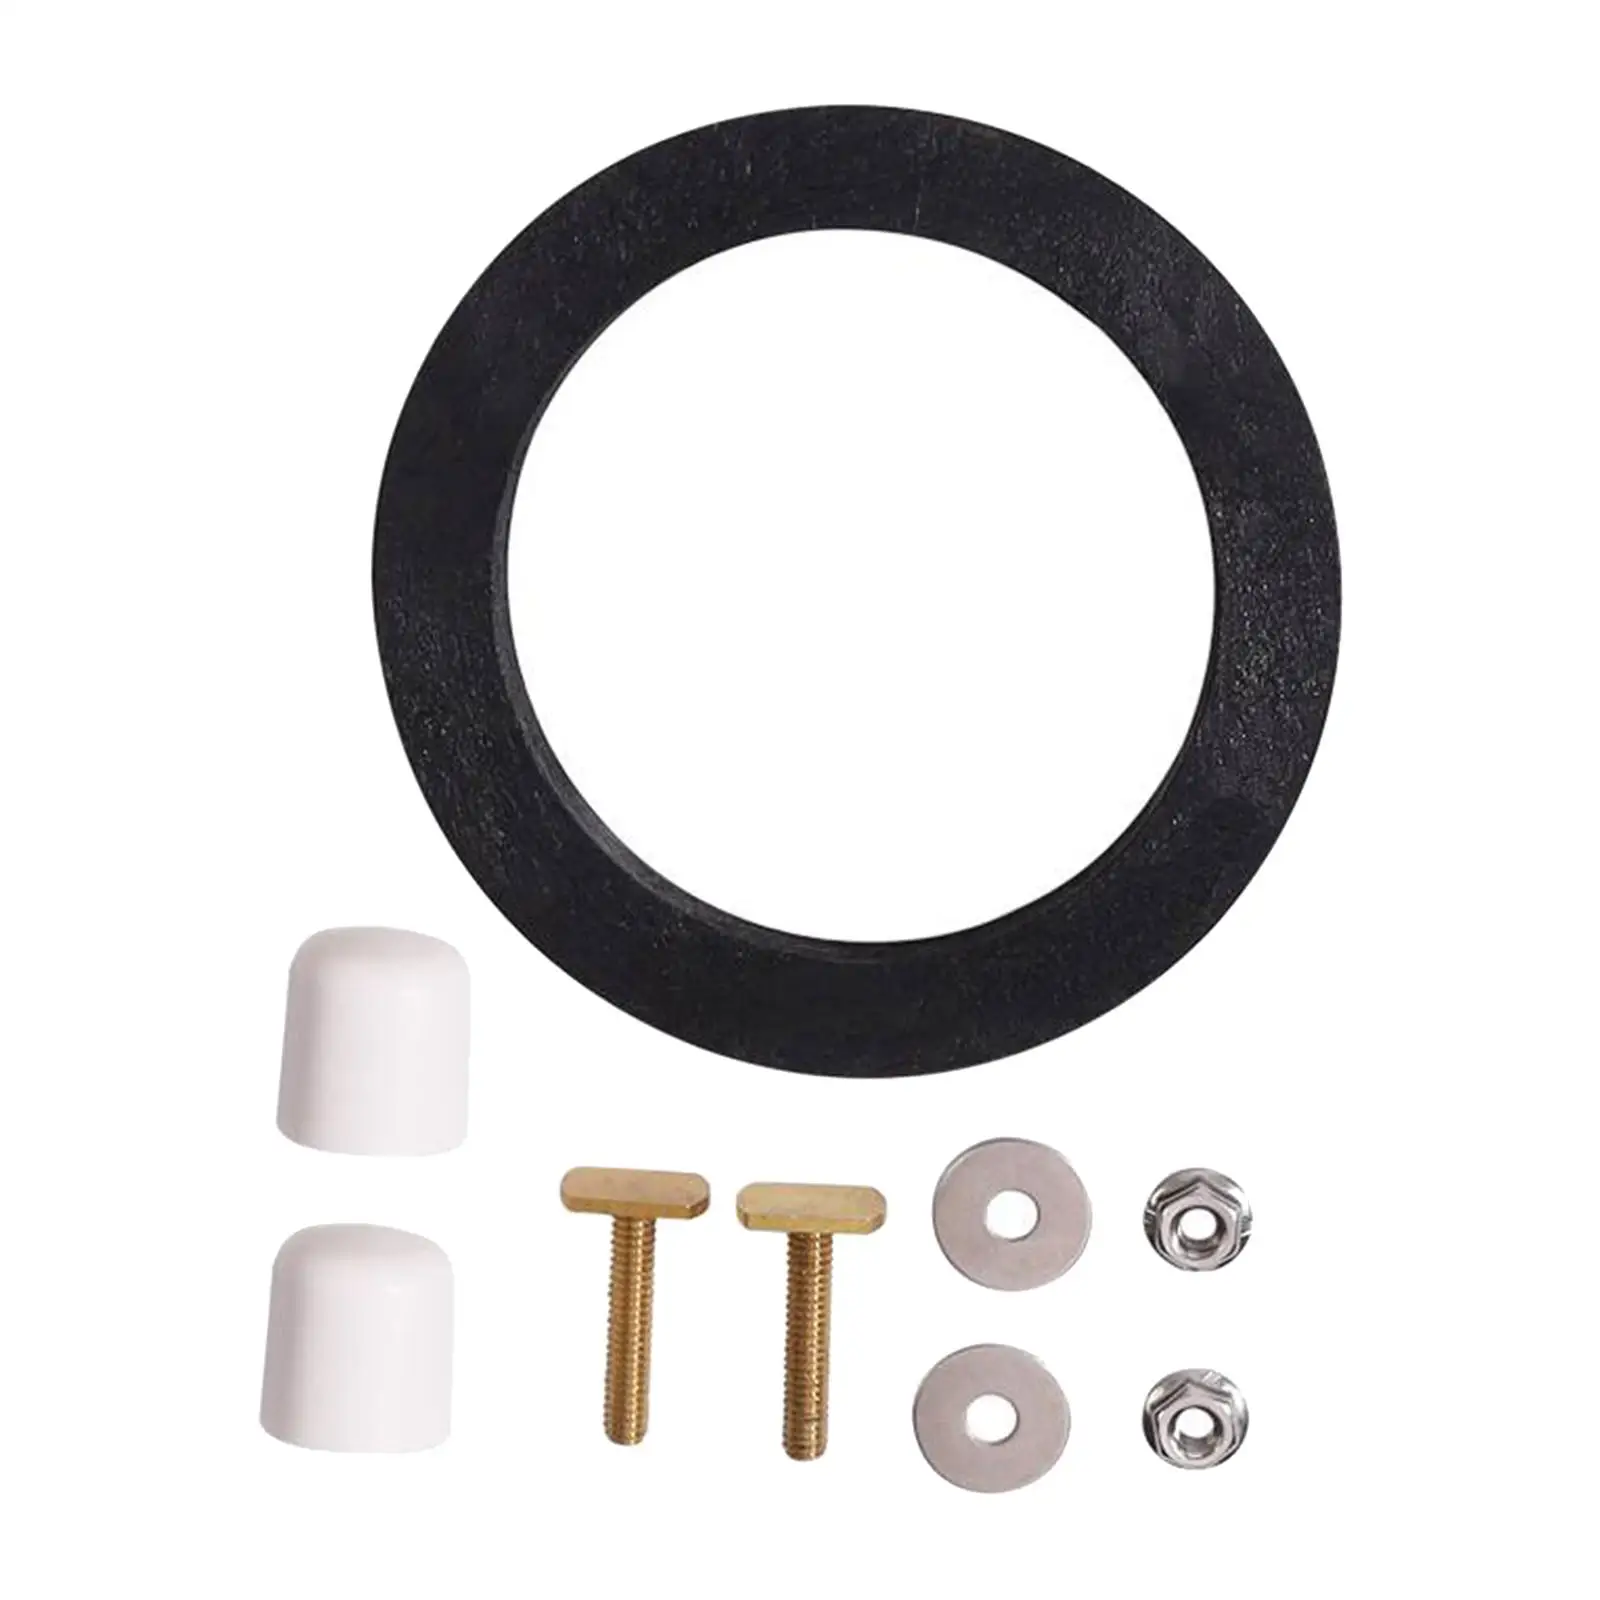 RV Toilet Seal Kit Mounting Hardware Replacement for Dometic 300 Series